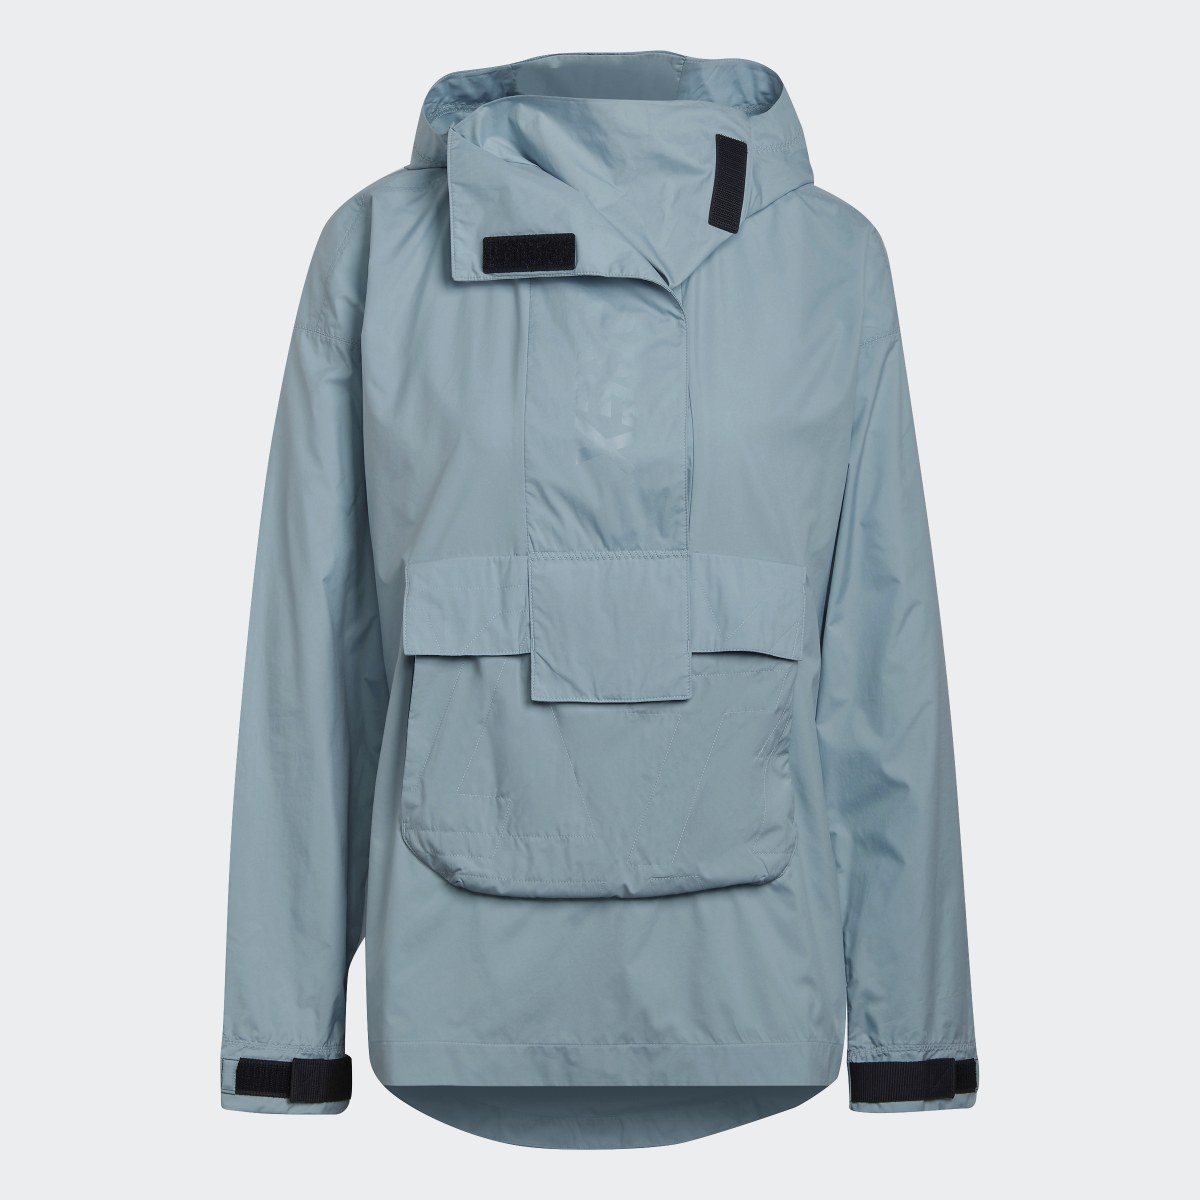 Adidas Terrex Made to be Remade Wind Anorak. 10